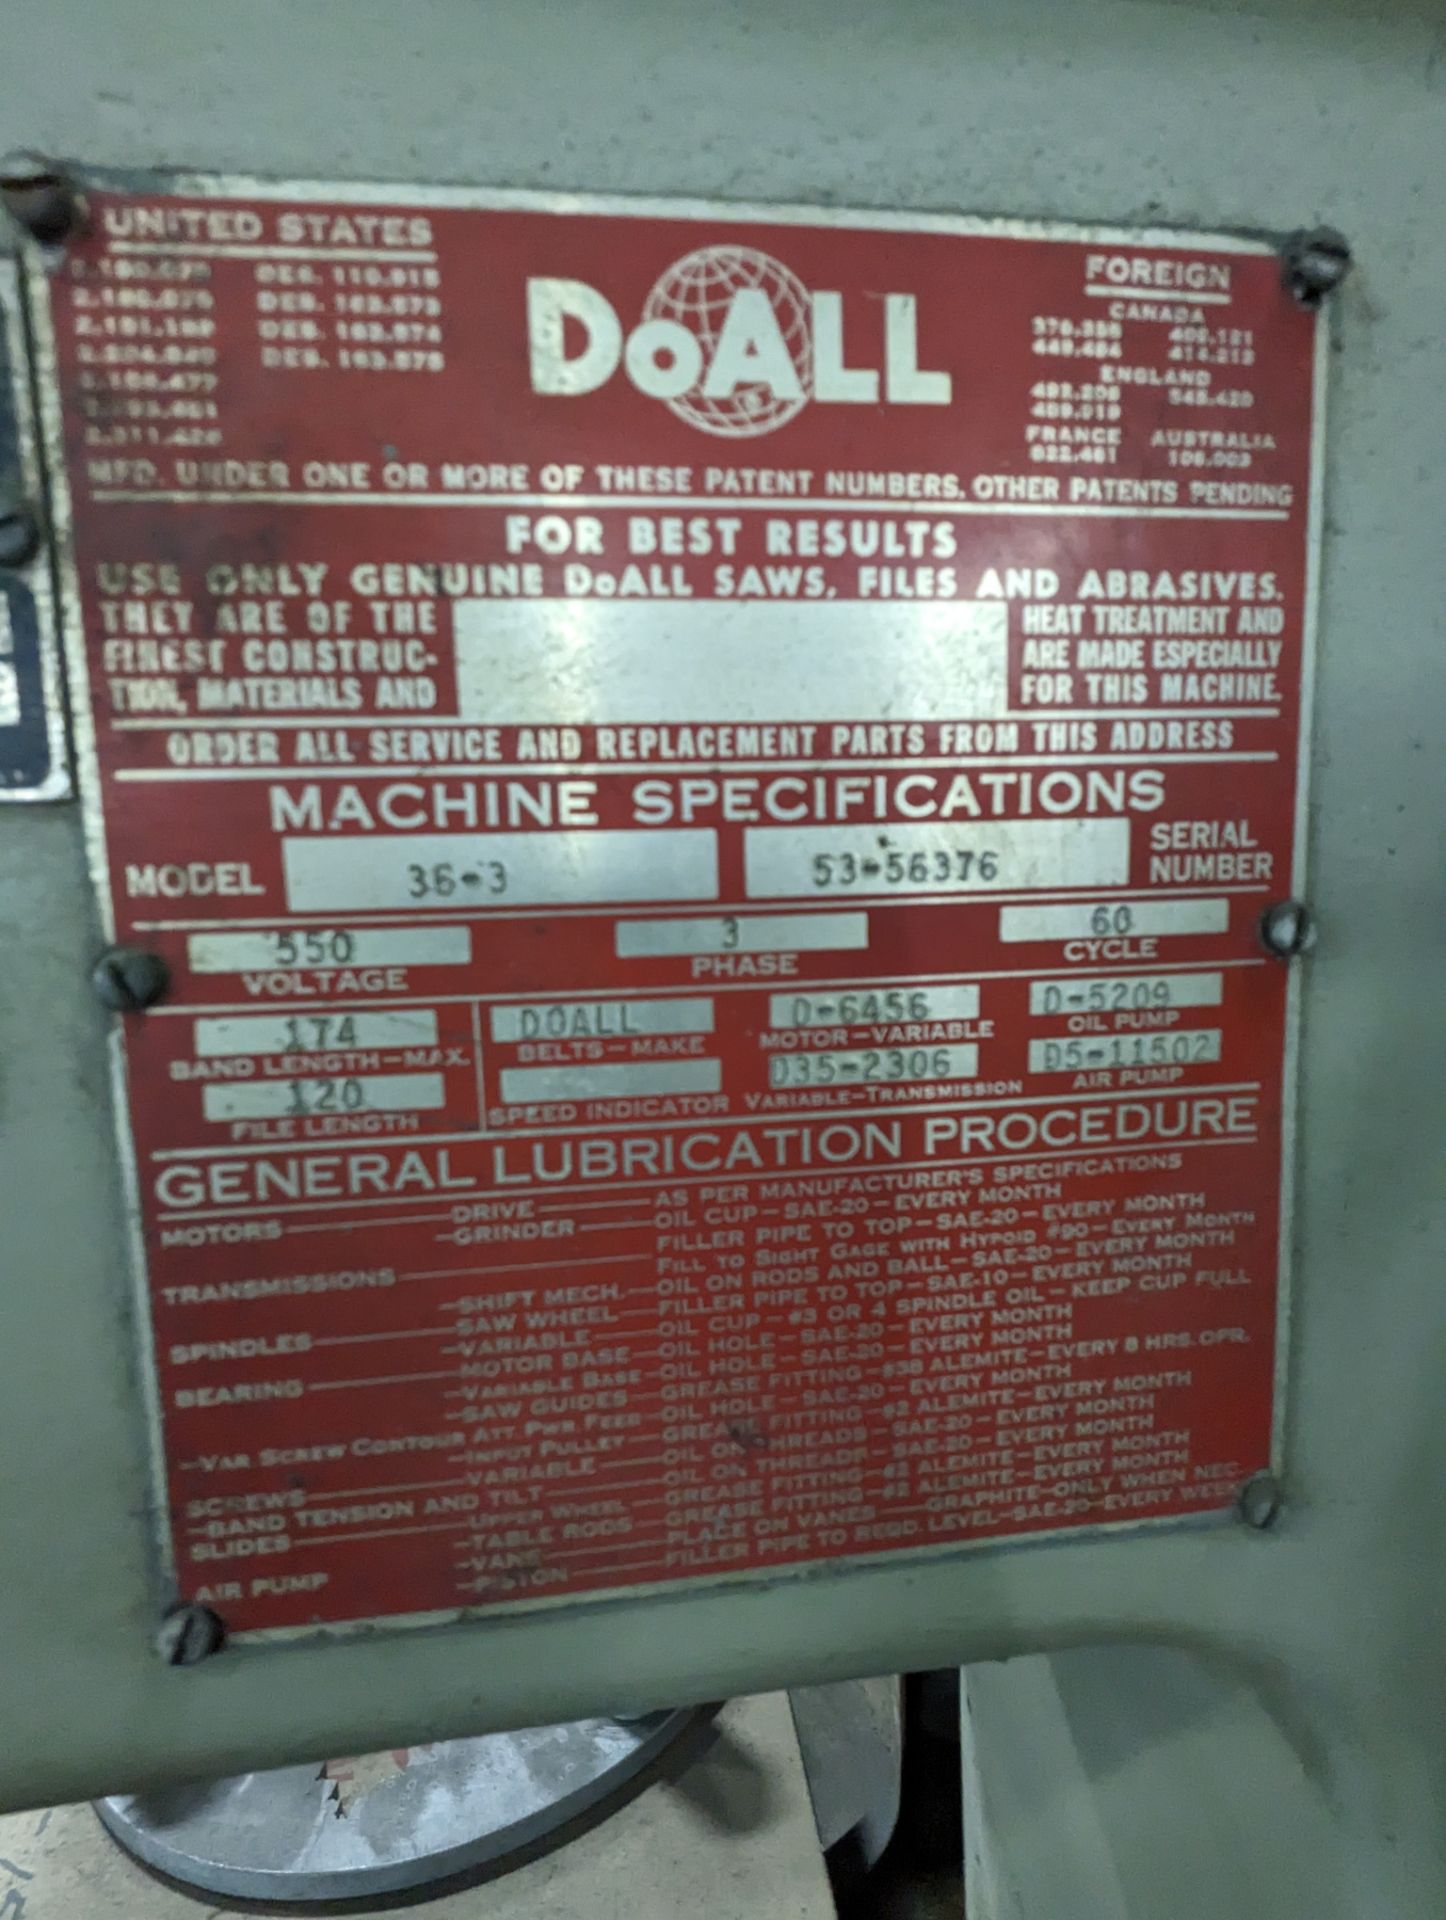 DOALL COUNTER-MATIC VERTICAL BAND SAW 36" MODEL # 36-3 SERIAL # 53-56376 - Image 2 of 3